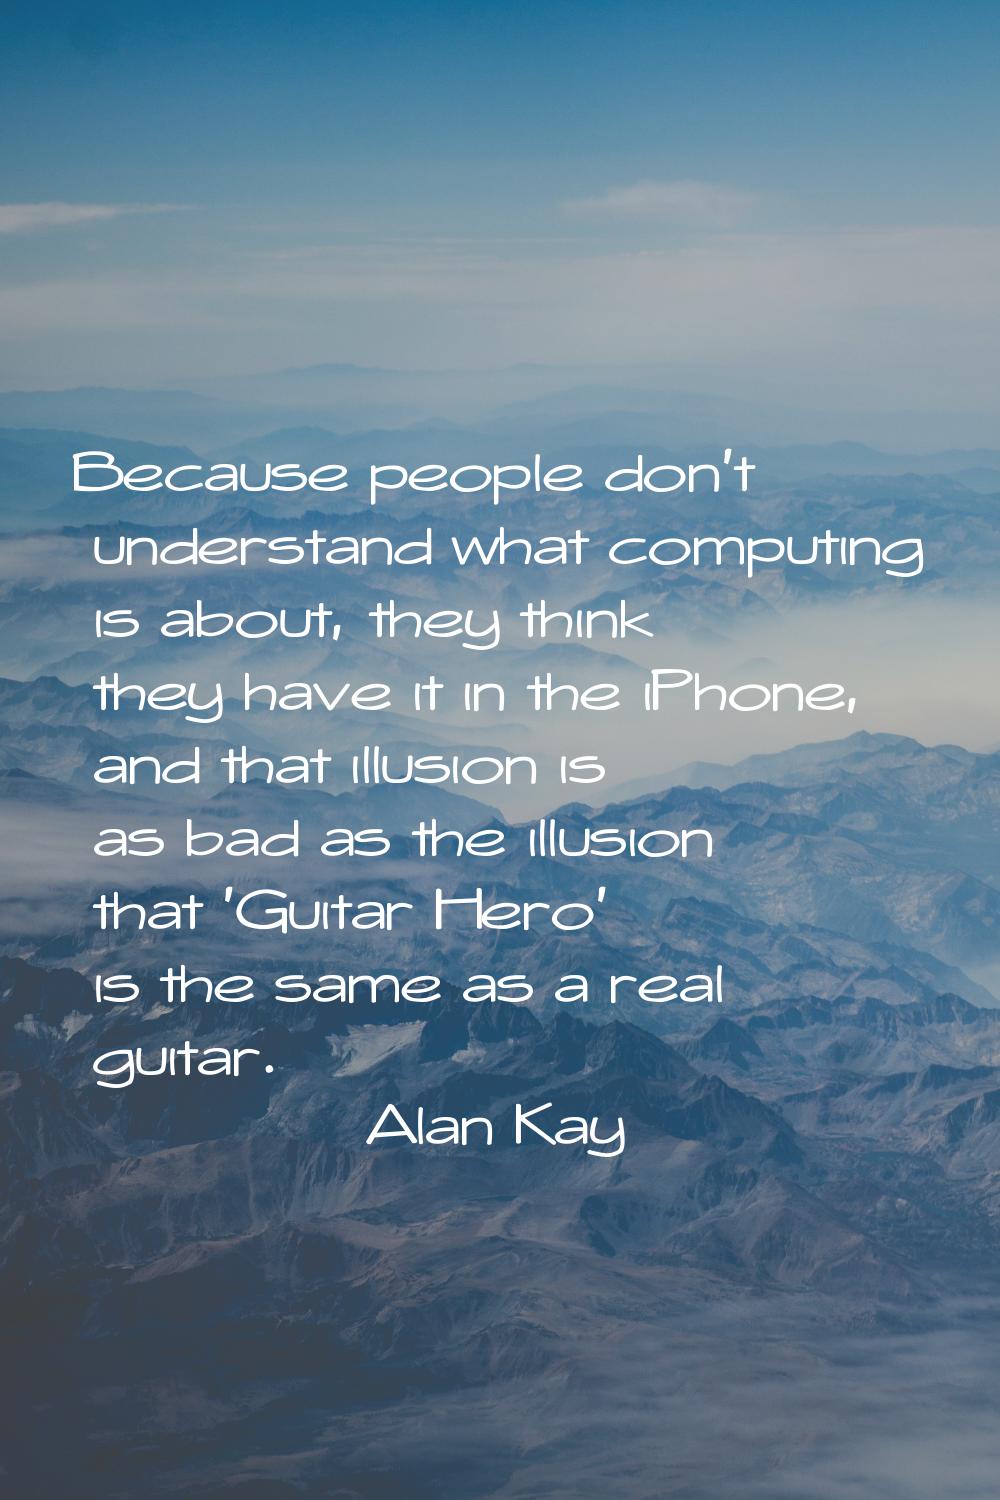 Because people don't understand what computing is about, they think they have it in the iPhone, and